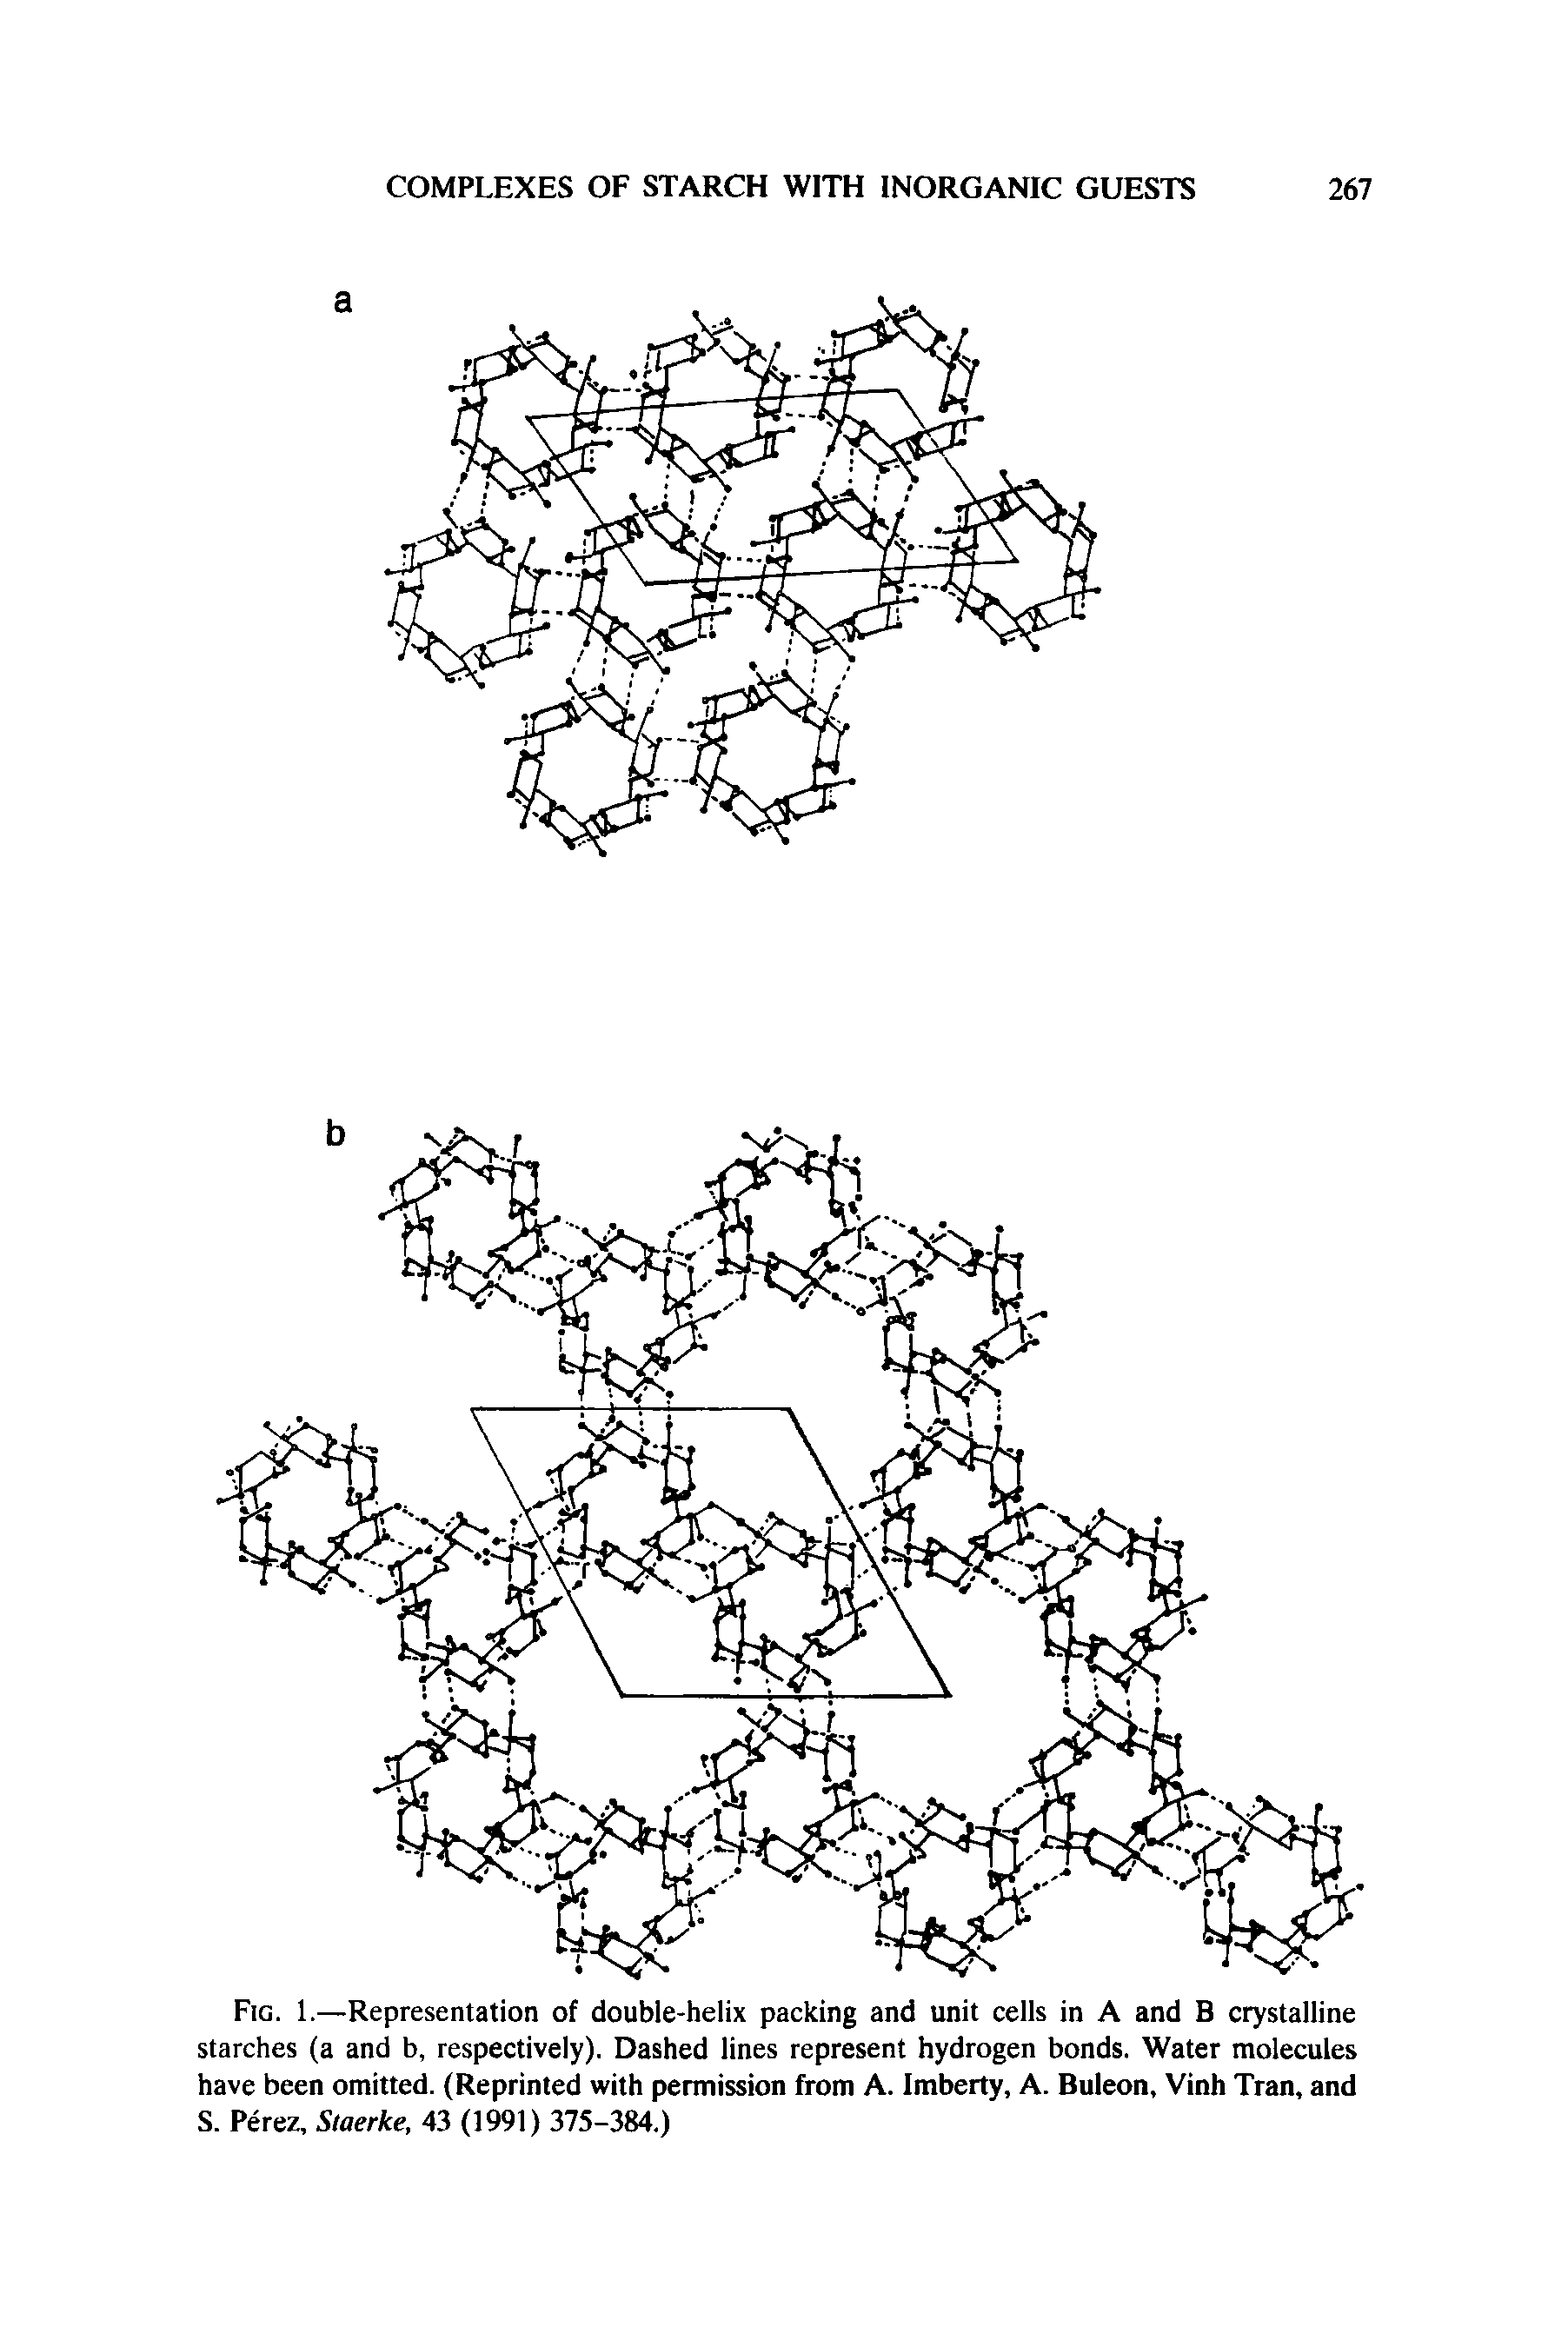 Fig. 1.—Representation of double-helix packing and unit cells in A and B crystalline starches (a and b, respectively). Dashed lines represent hydrogen bonds. Water molecules have been omitted. (Reprinted with permission from A. Imberty, A. Buleon, Vinh Tran, and S. Perez, Staerke, 43 (1991) 375-384.)...